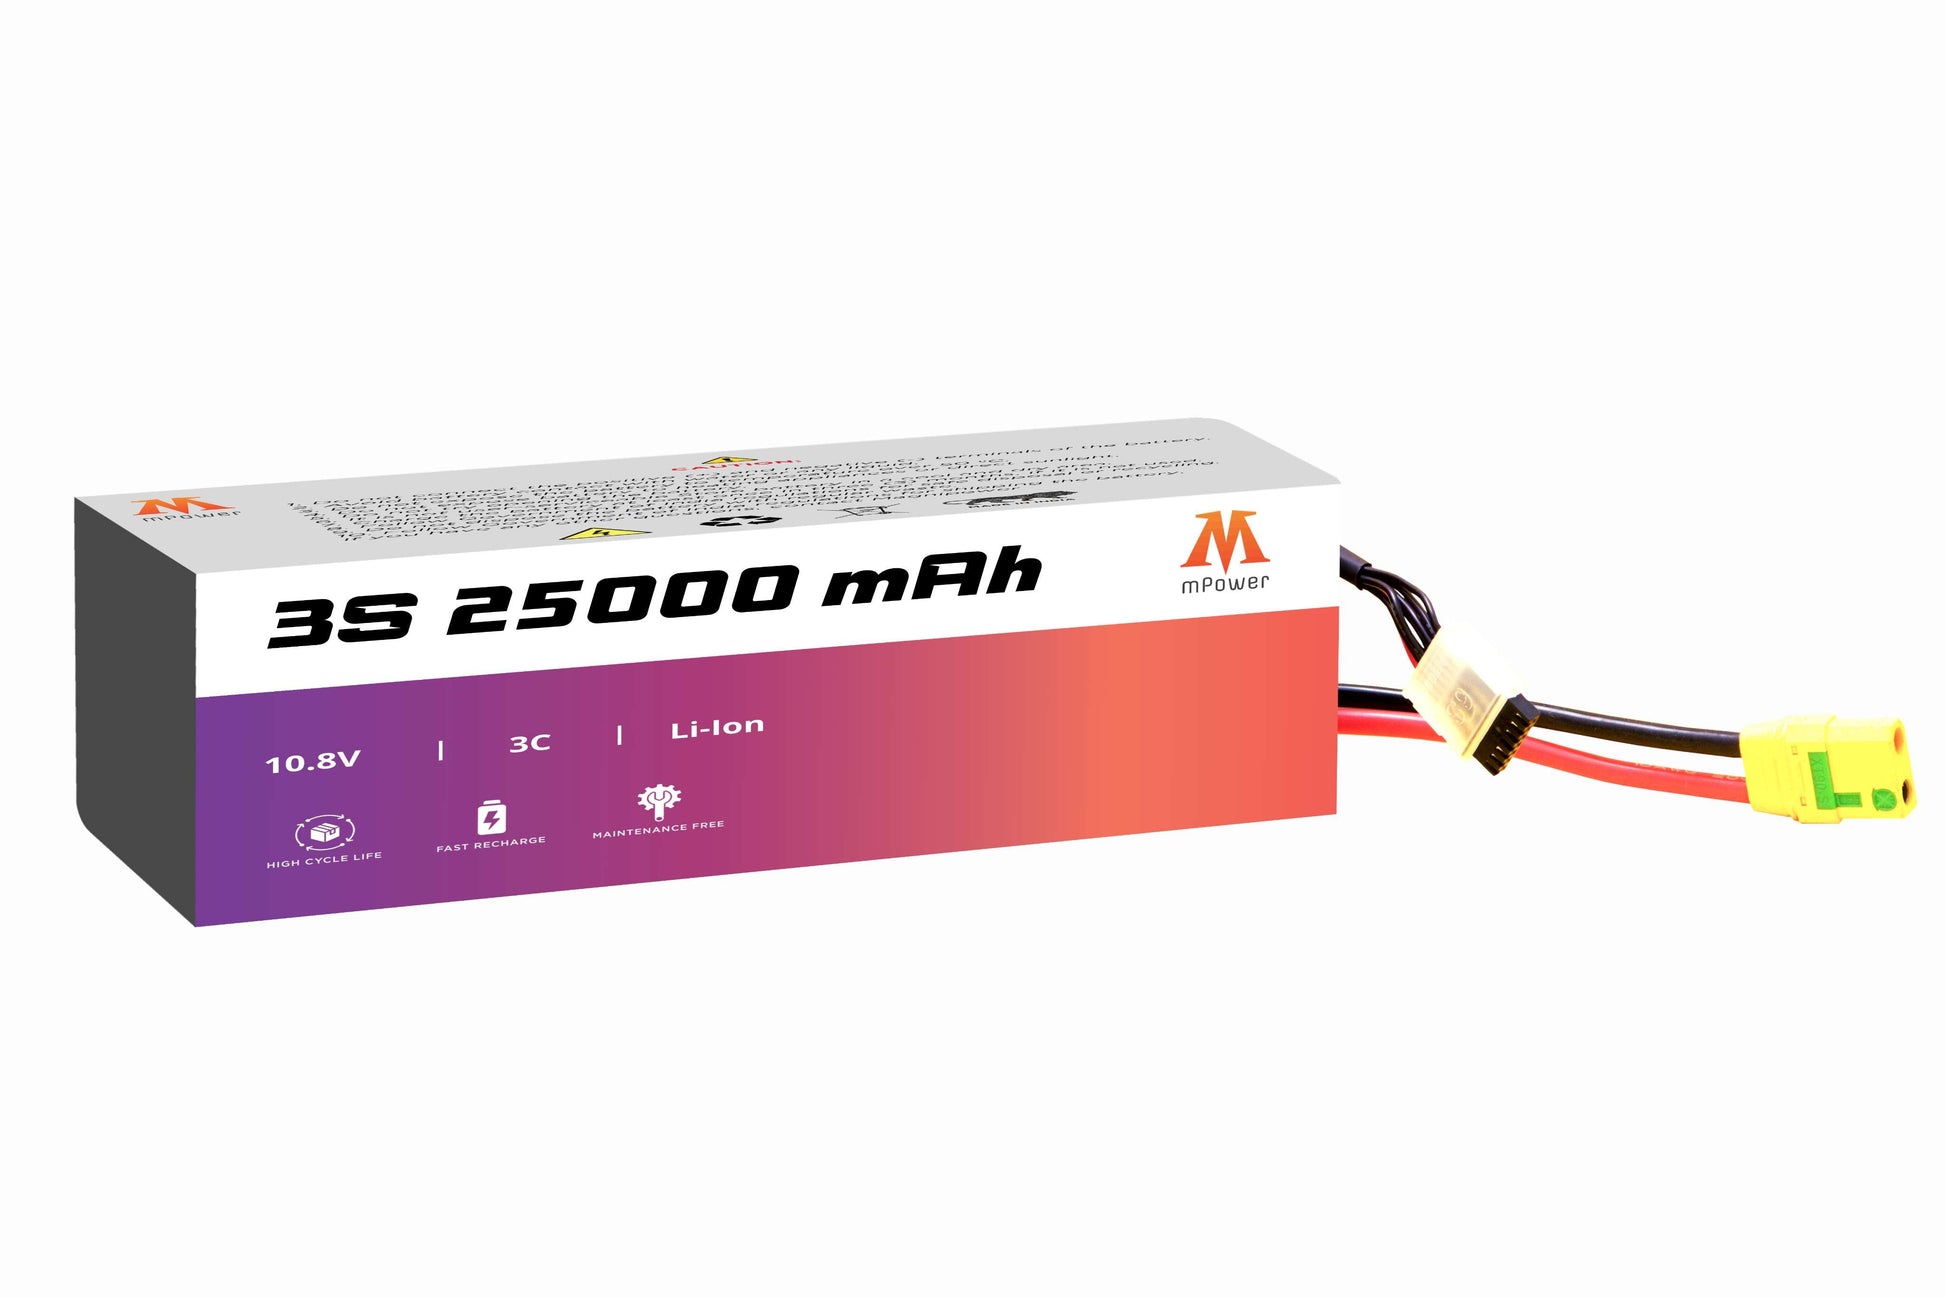 mPower 3S 25000mAh Lithium-Ion Battery for Survey Drones-mpowerlithium